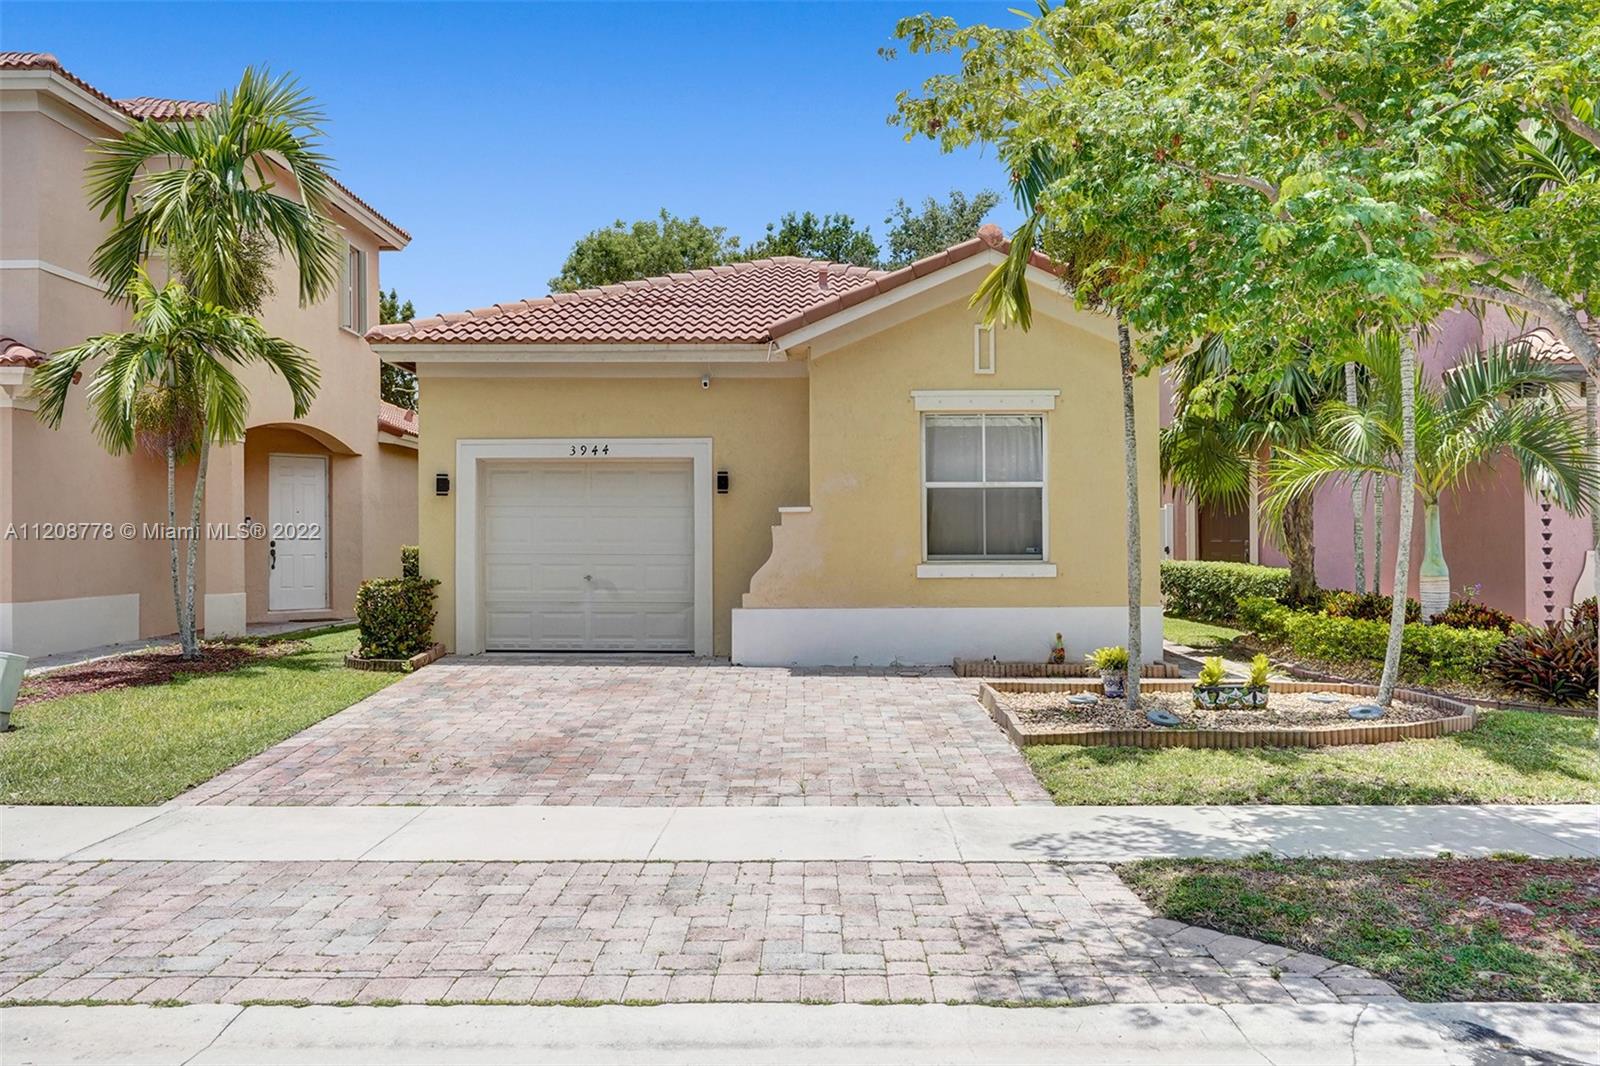 Beautiful Move in ready 3/2 home in the Amazing Waterstone Community. High ceiling throughout the entire home. Stainless Steal appliances and tile floor throughout home. Completely Fenced in Yard.Brand new AC unit. Located less than a mile to Baptist Hospital and the Florida Turnpike.